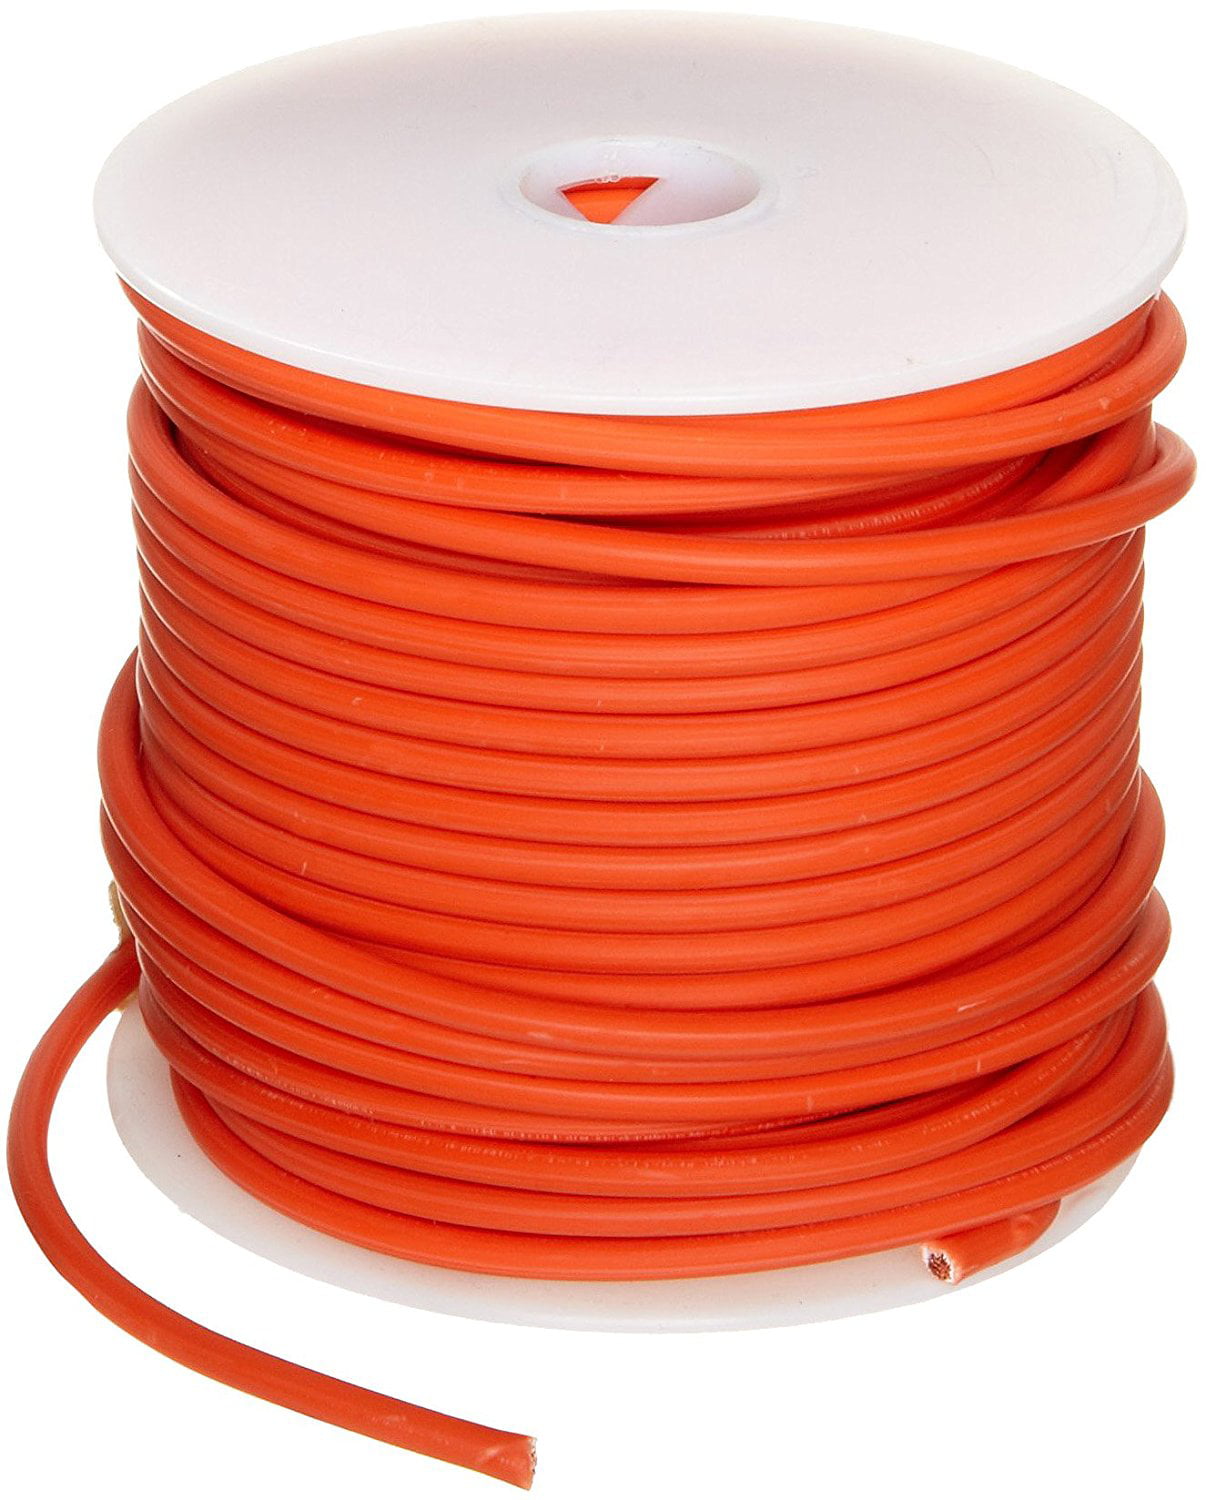 Green 16 AWG 1000 Length GPT Automotive Copper Wire Pack of 1 0.050 Diameter